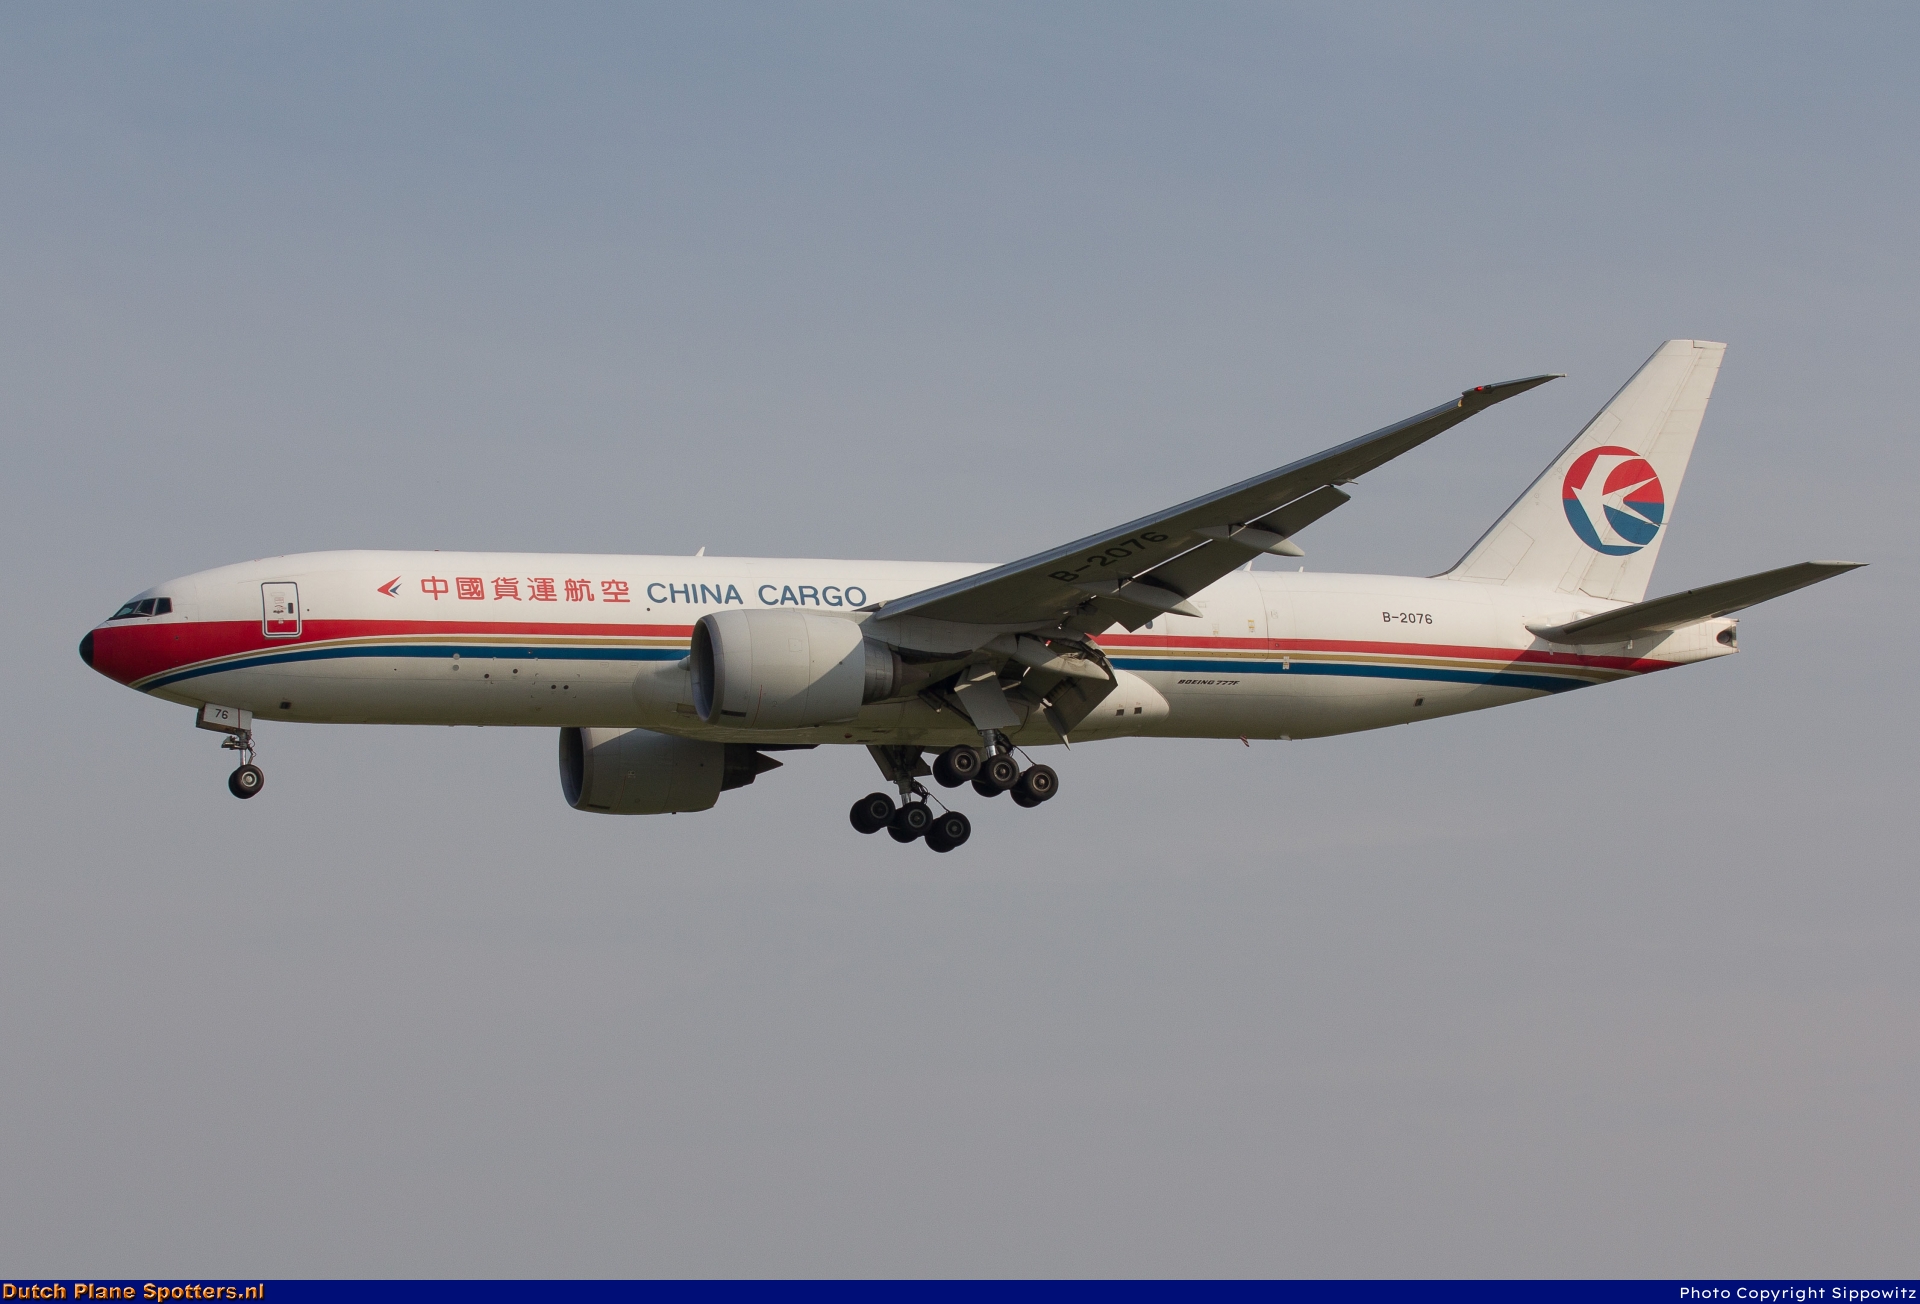 B-2076 Boeing 777-F China Cargo Airlines by Sippowitz